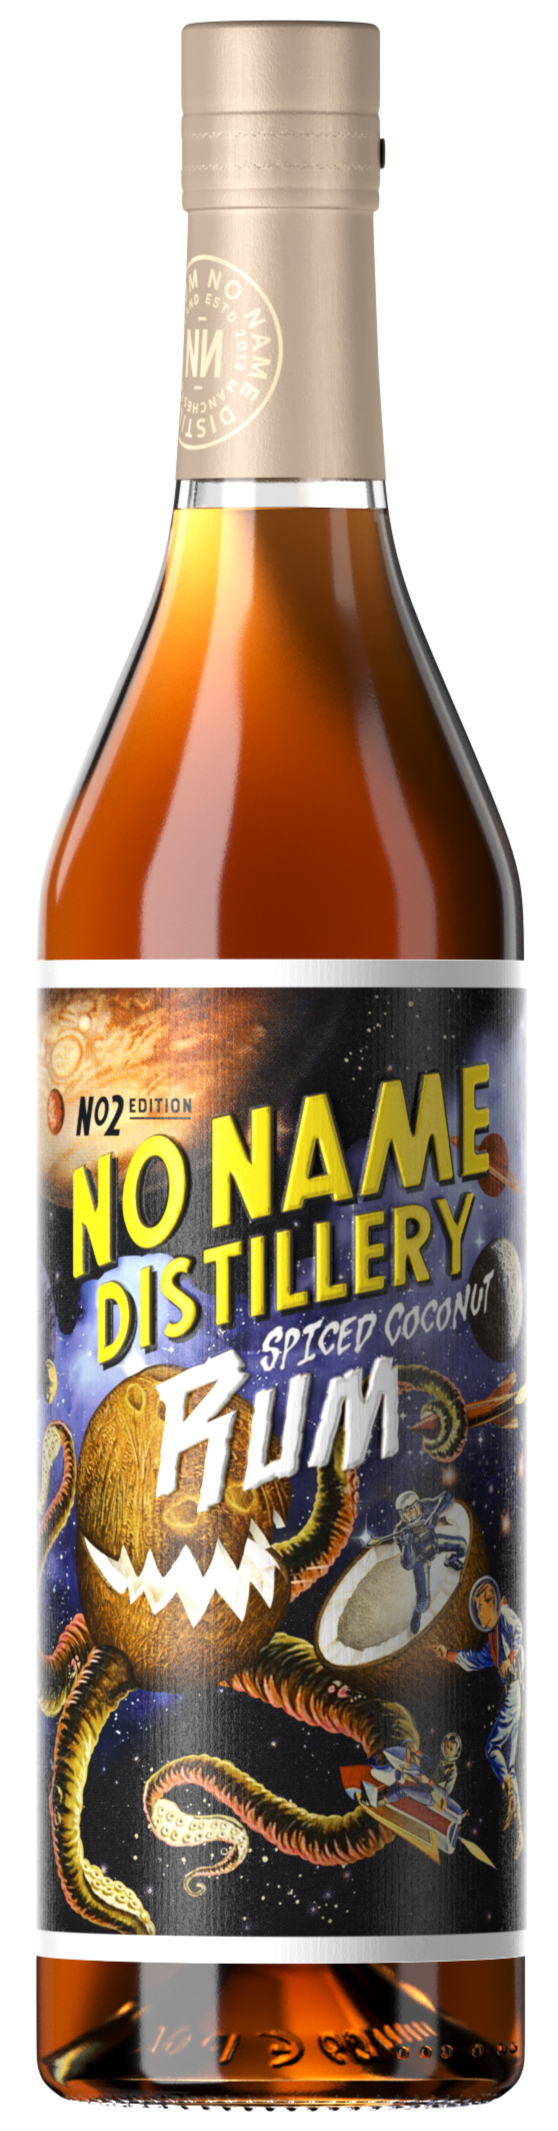 No Name Spiced Coconut Rum 70cl